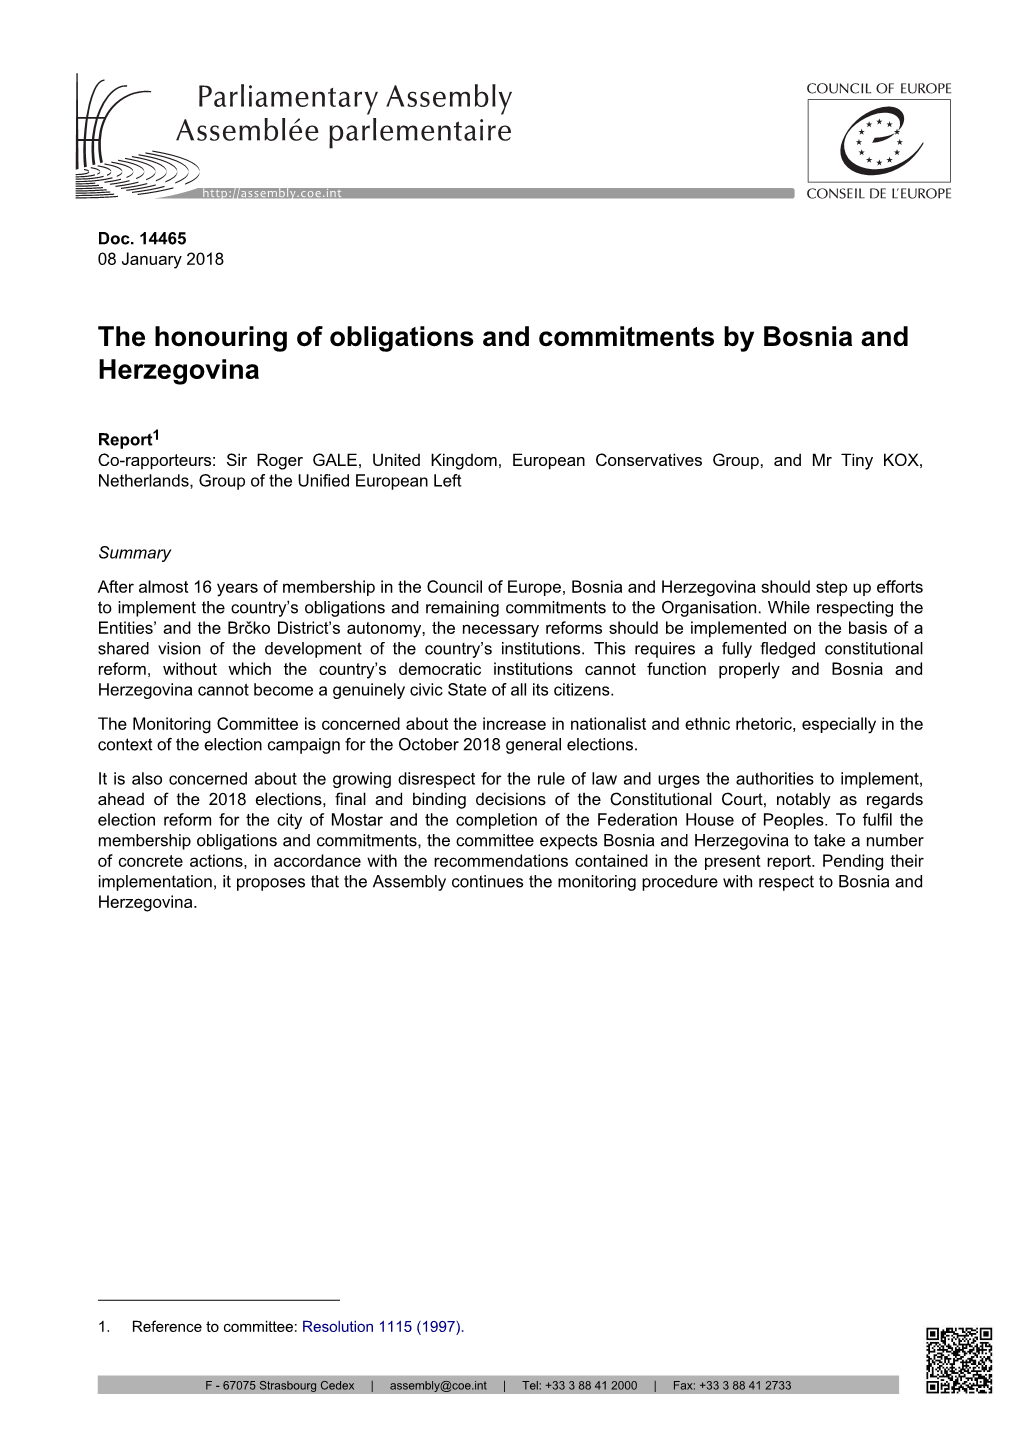 The Honouring of Obligations and Commitments by Bosnia and Herzegovina